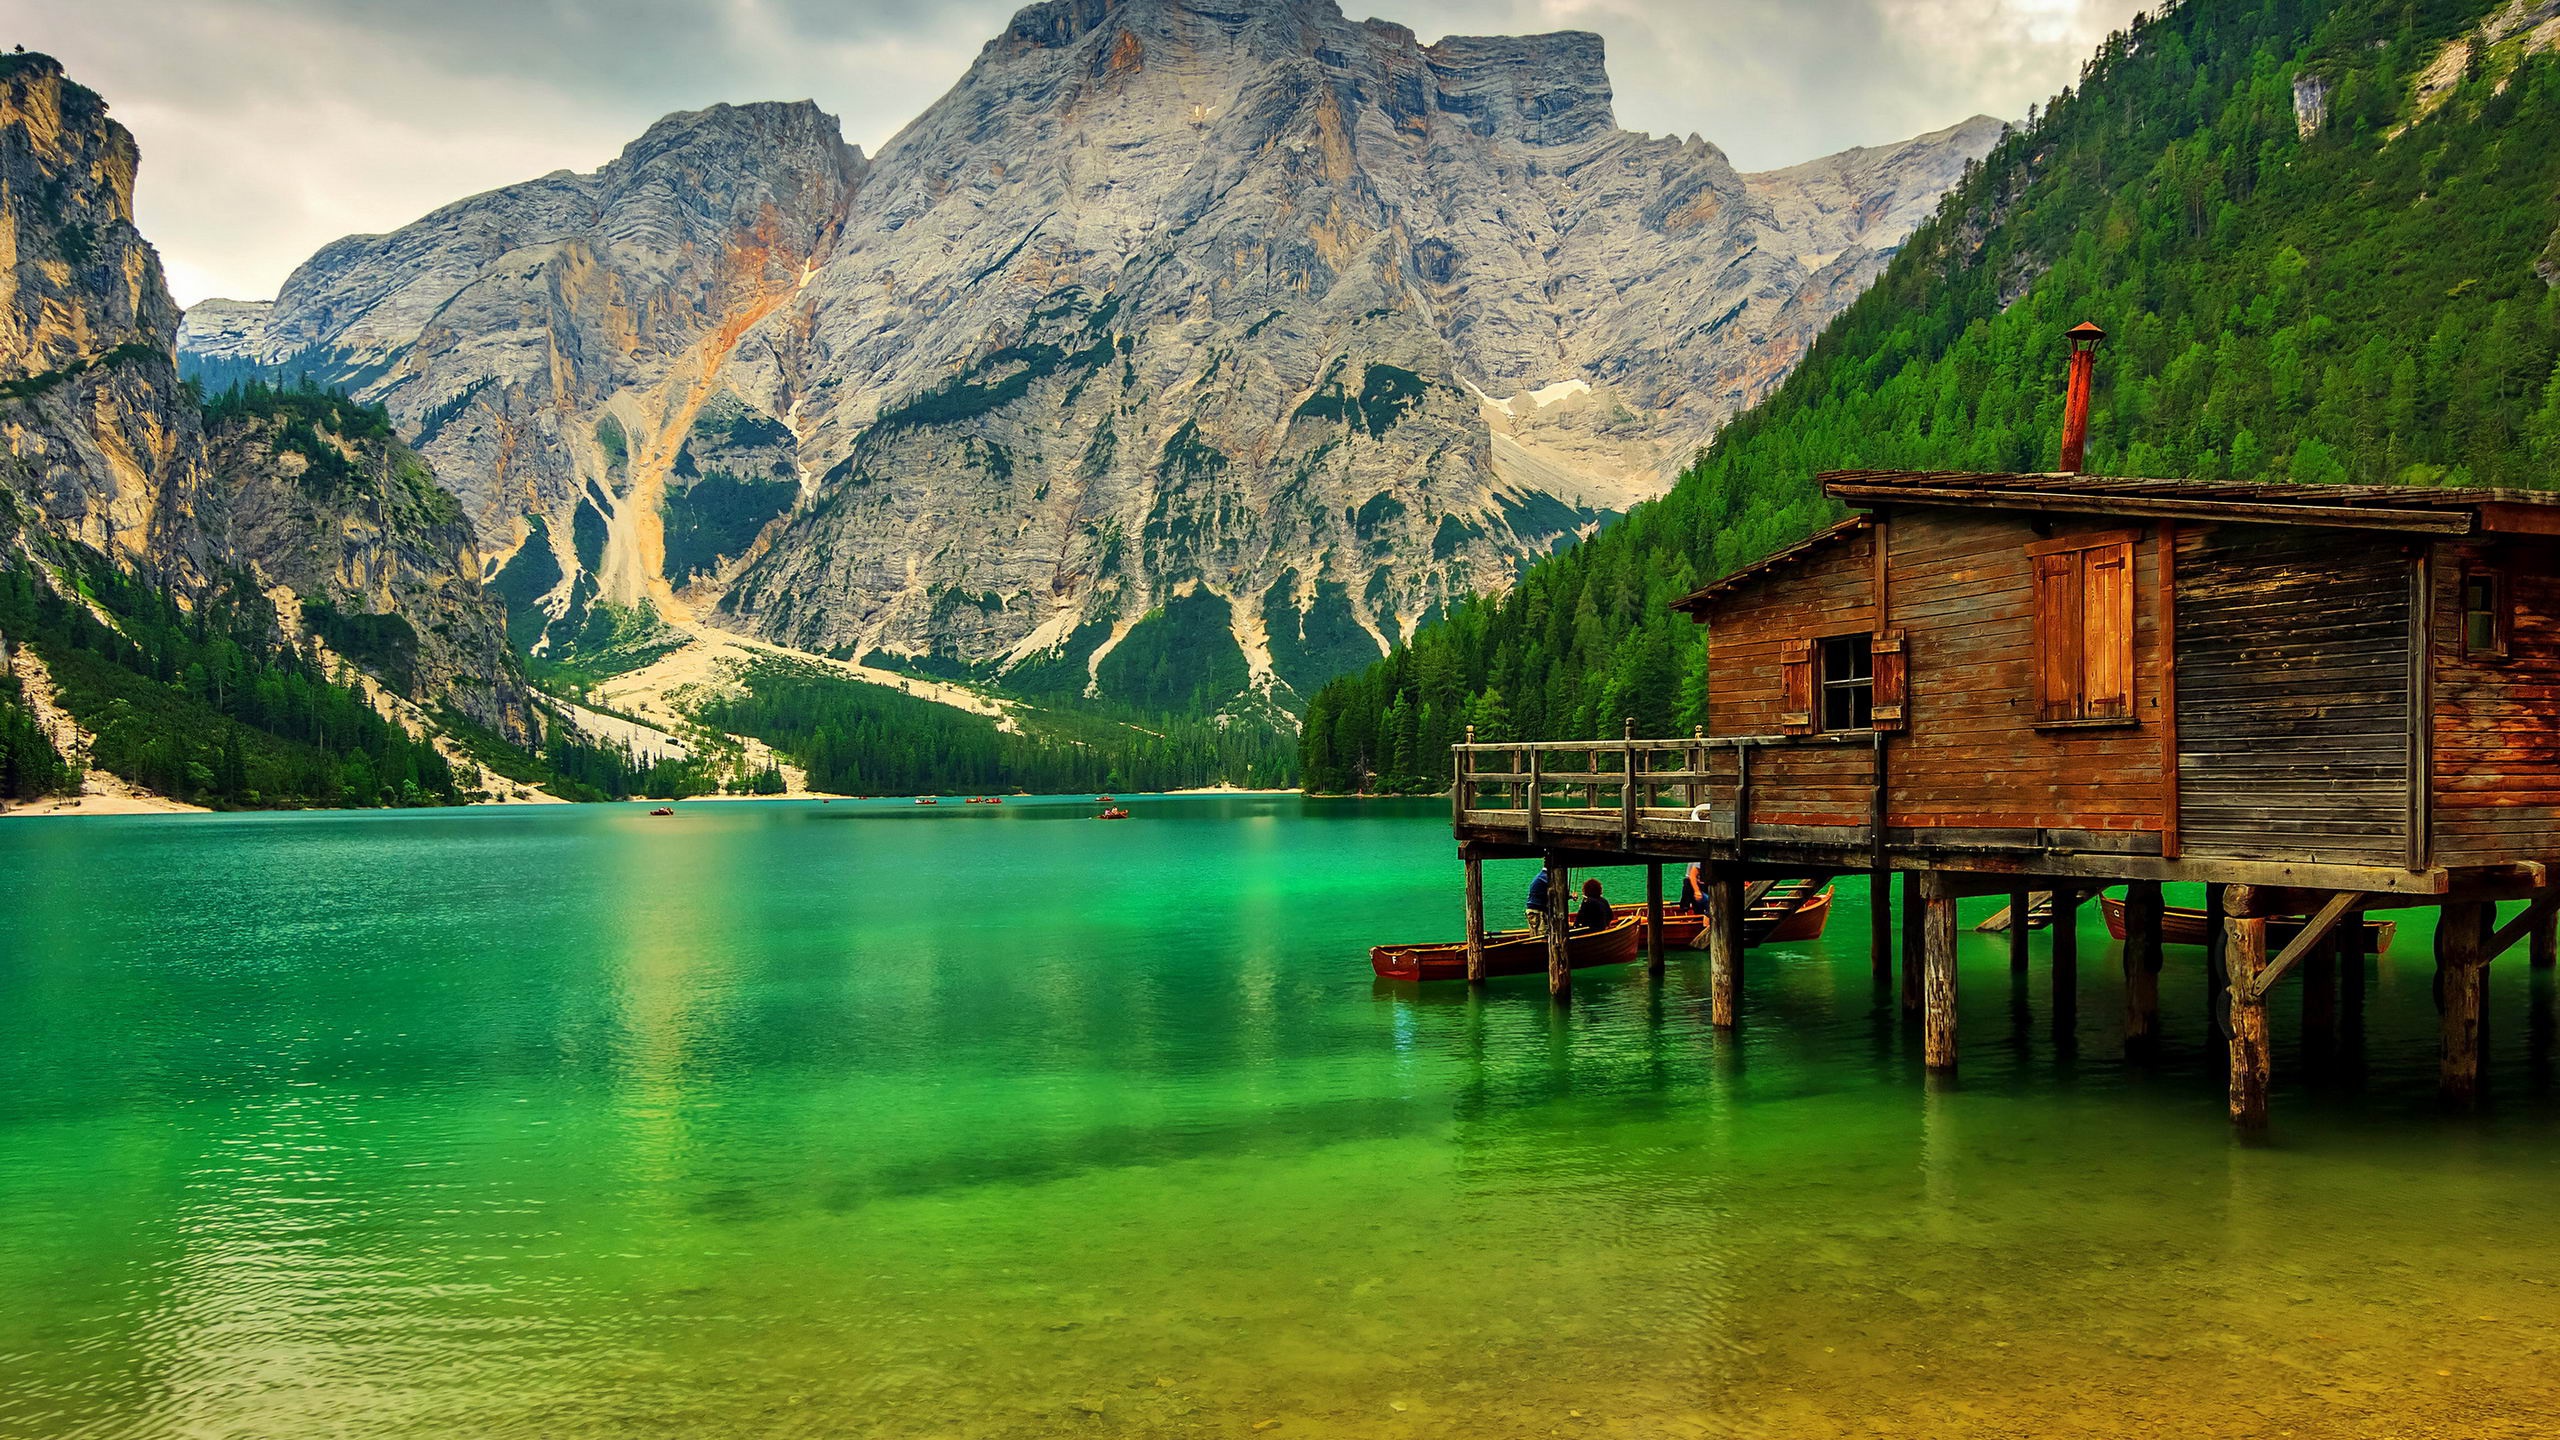 General 2560x1440 landscape mountains lake forest nature boat Pragser Wildsee Italy South Tyrol Alps